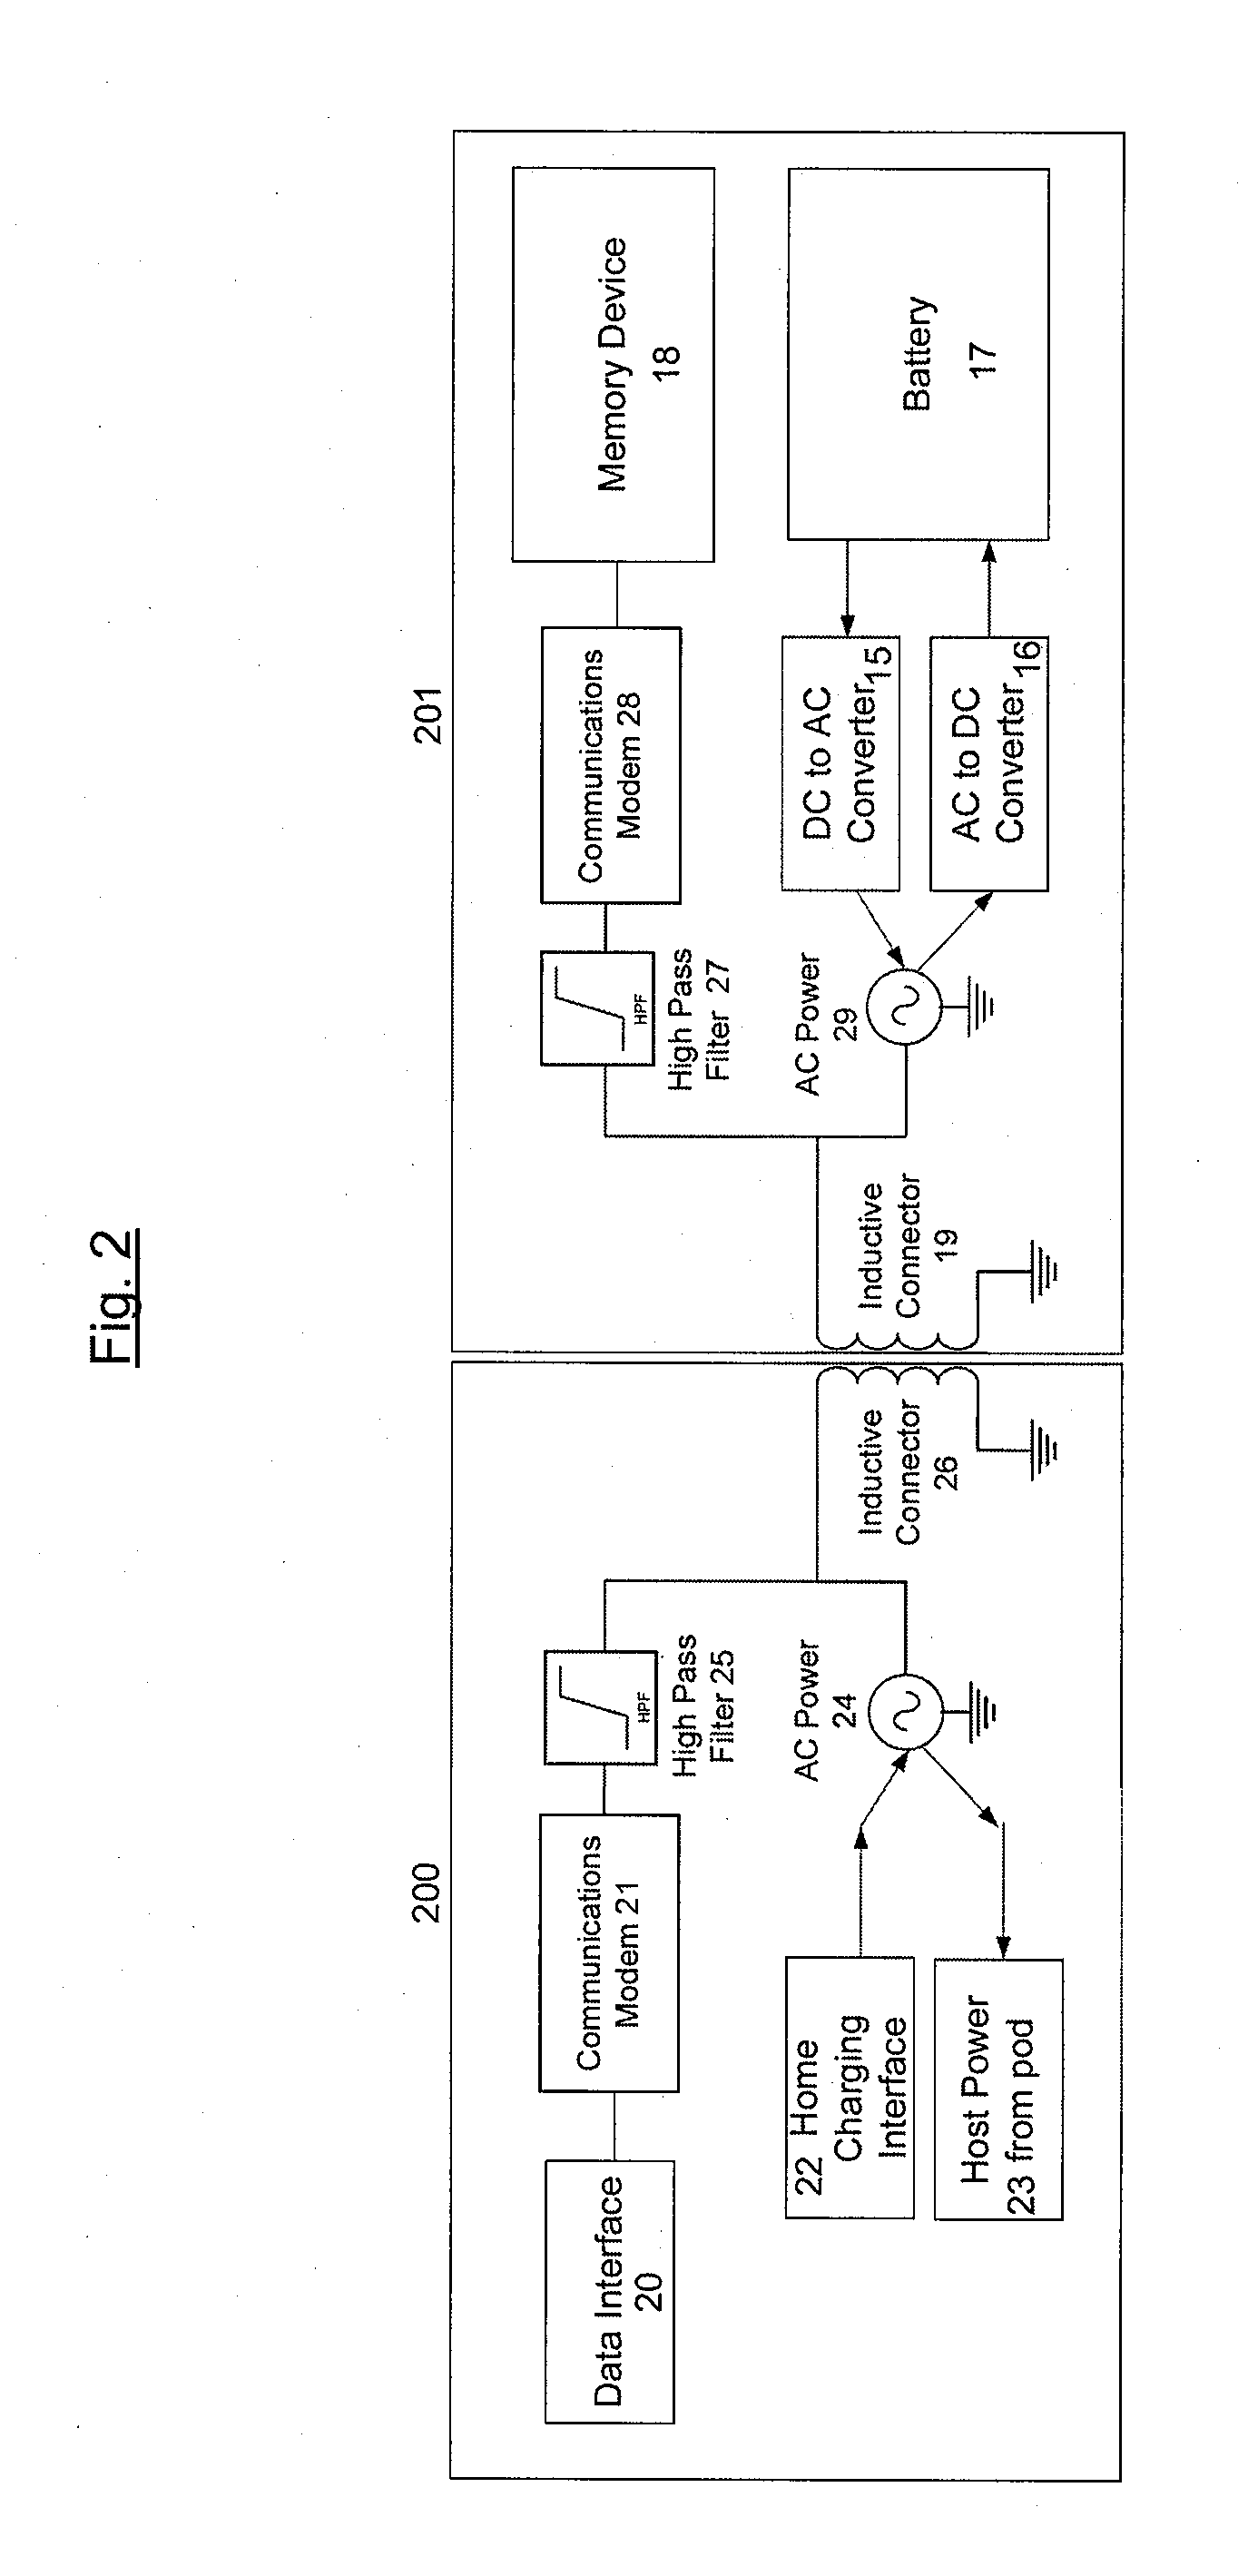 Inductively coupled data and power transfer system and apparatus